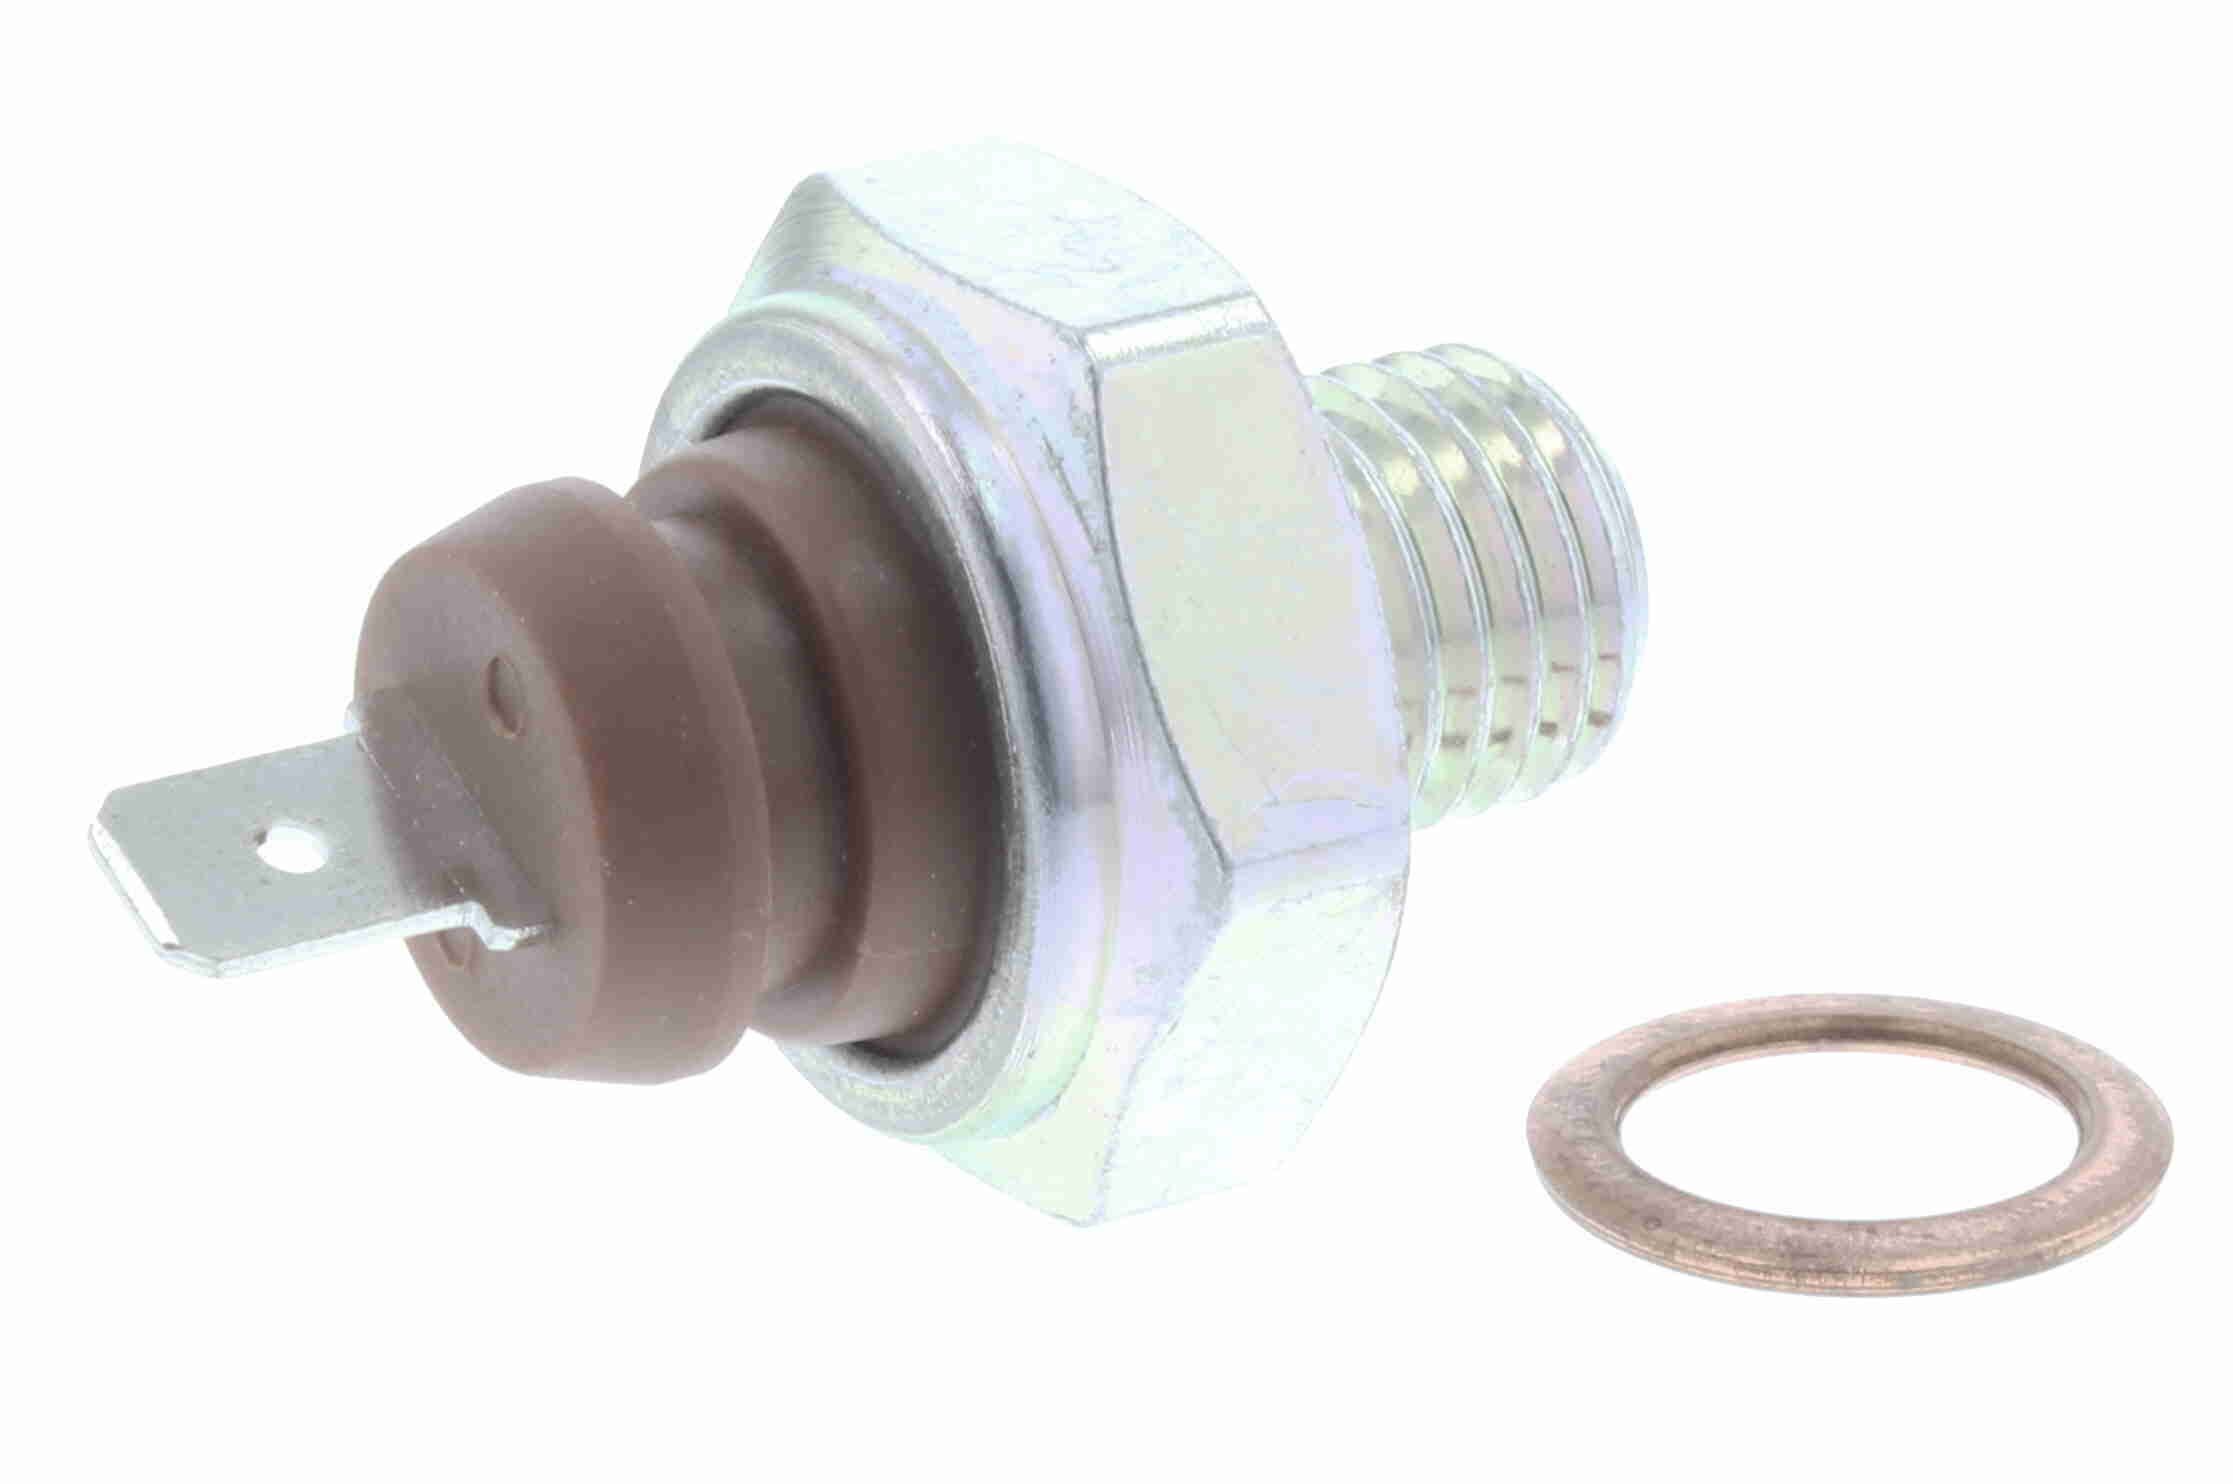 Oil Pressure Switch VEMO V20-73-0122-1 - Fiat 1500 Convertible Sensors, relays, control units spare parts order